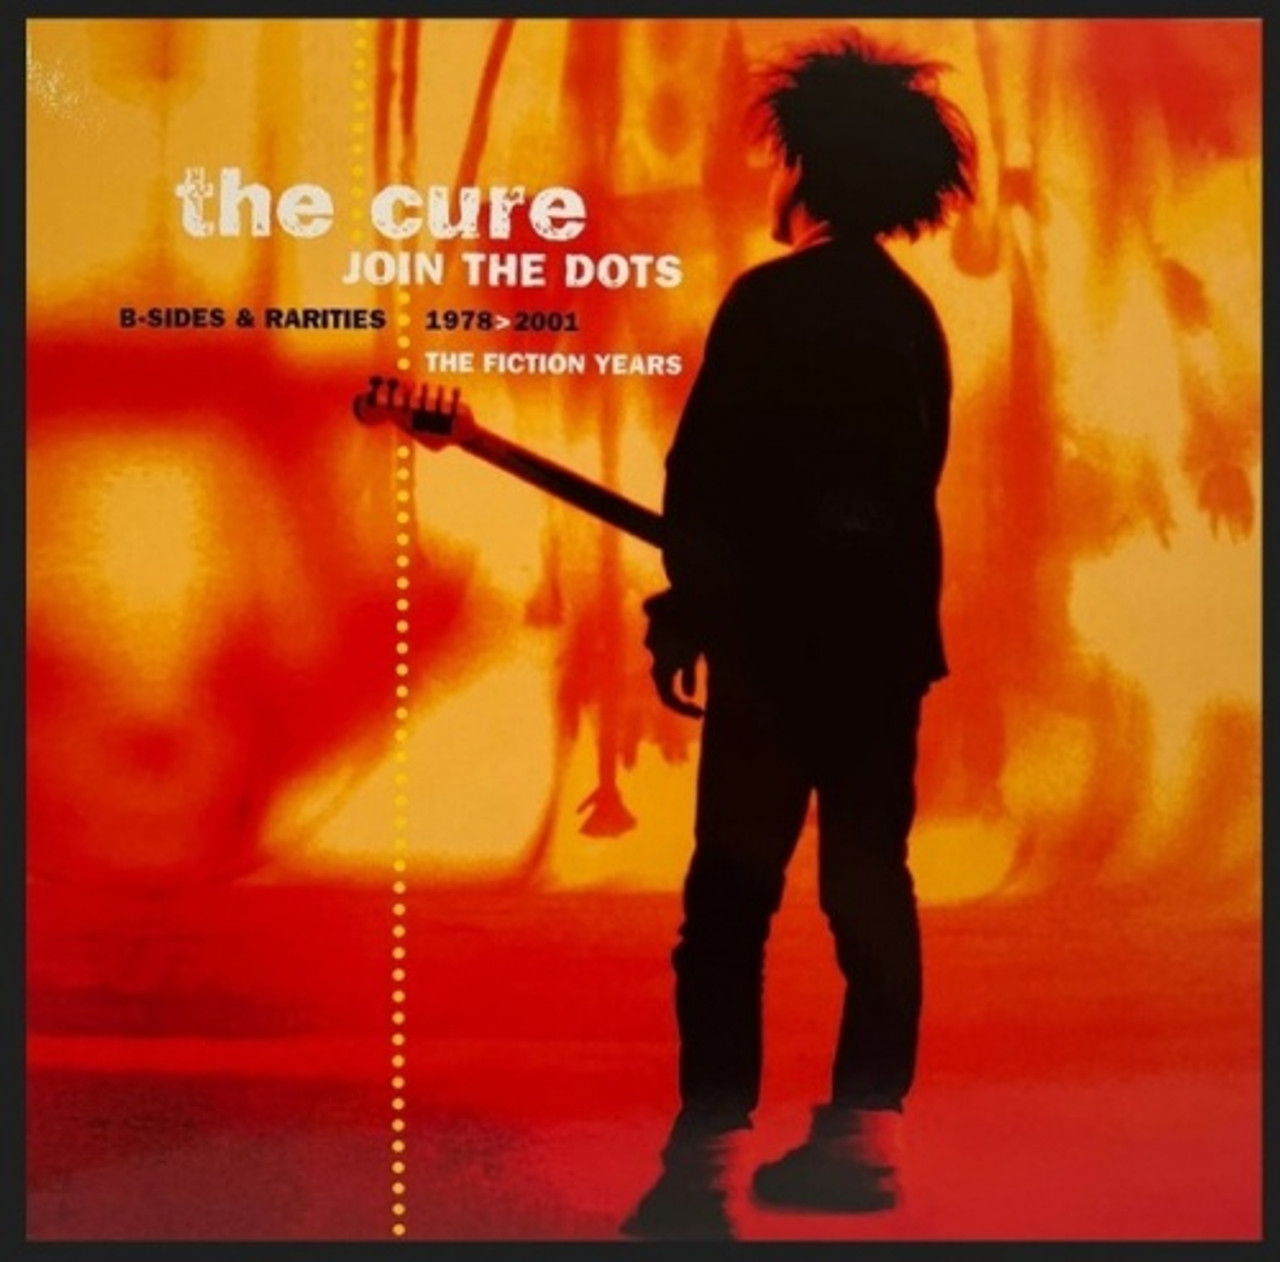 The Cure - Join The Dots: B-Sides u0026 Rarities 1978u003e2001 The Fiction Years -  LP Colored Vinyl - Ear Candy Music